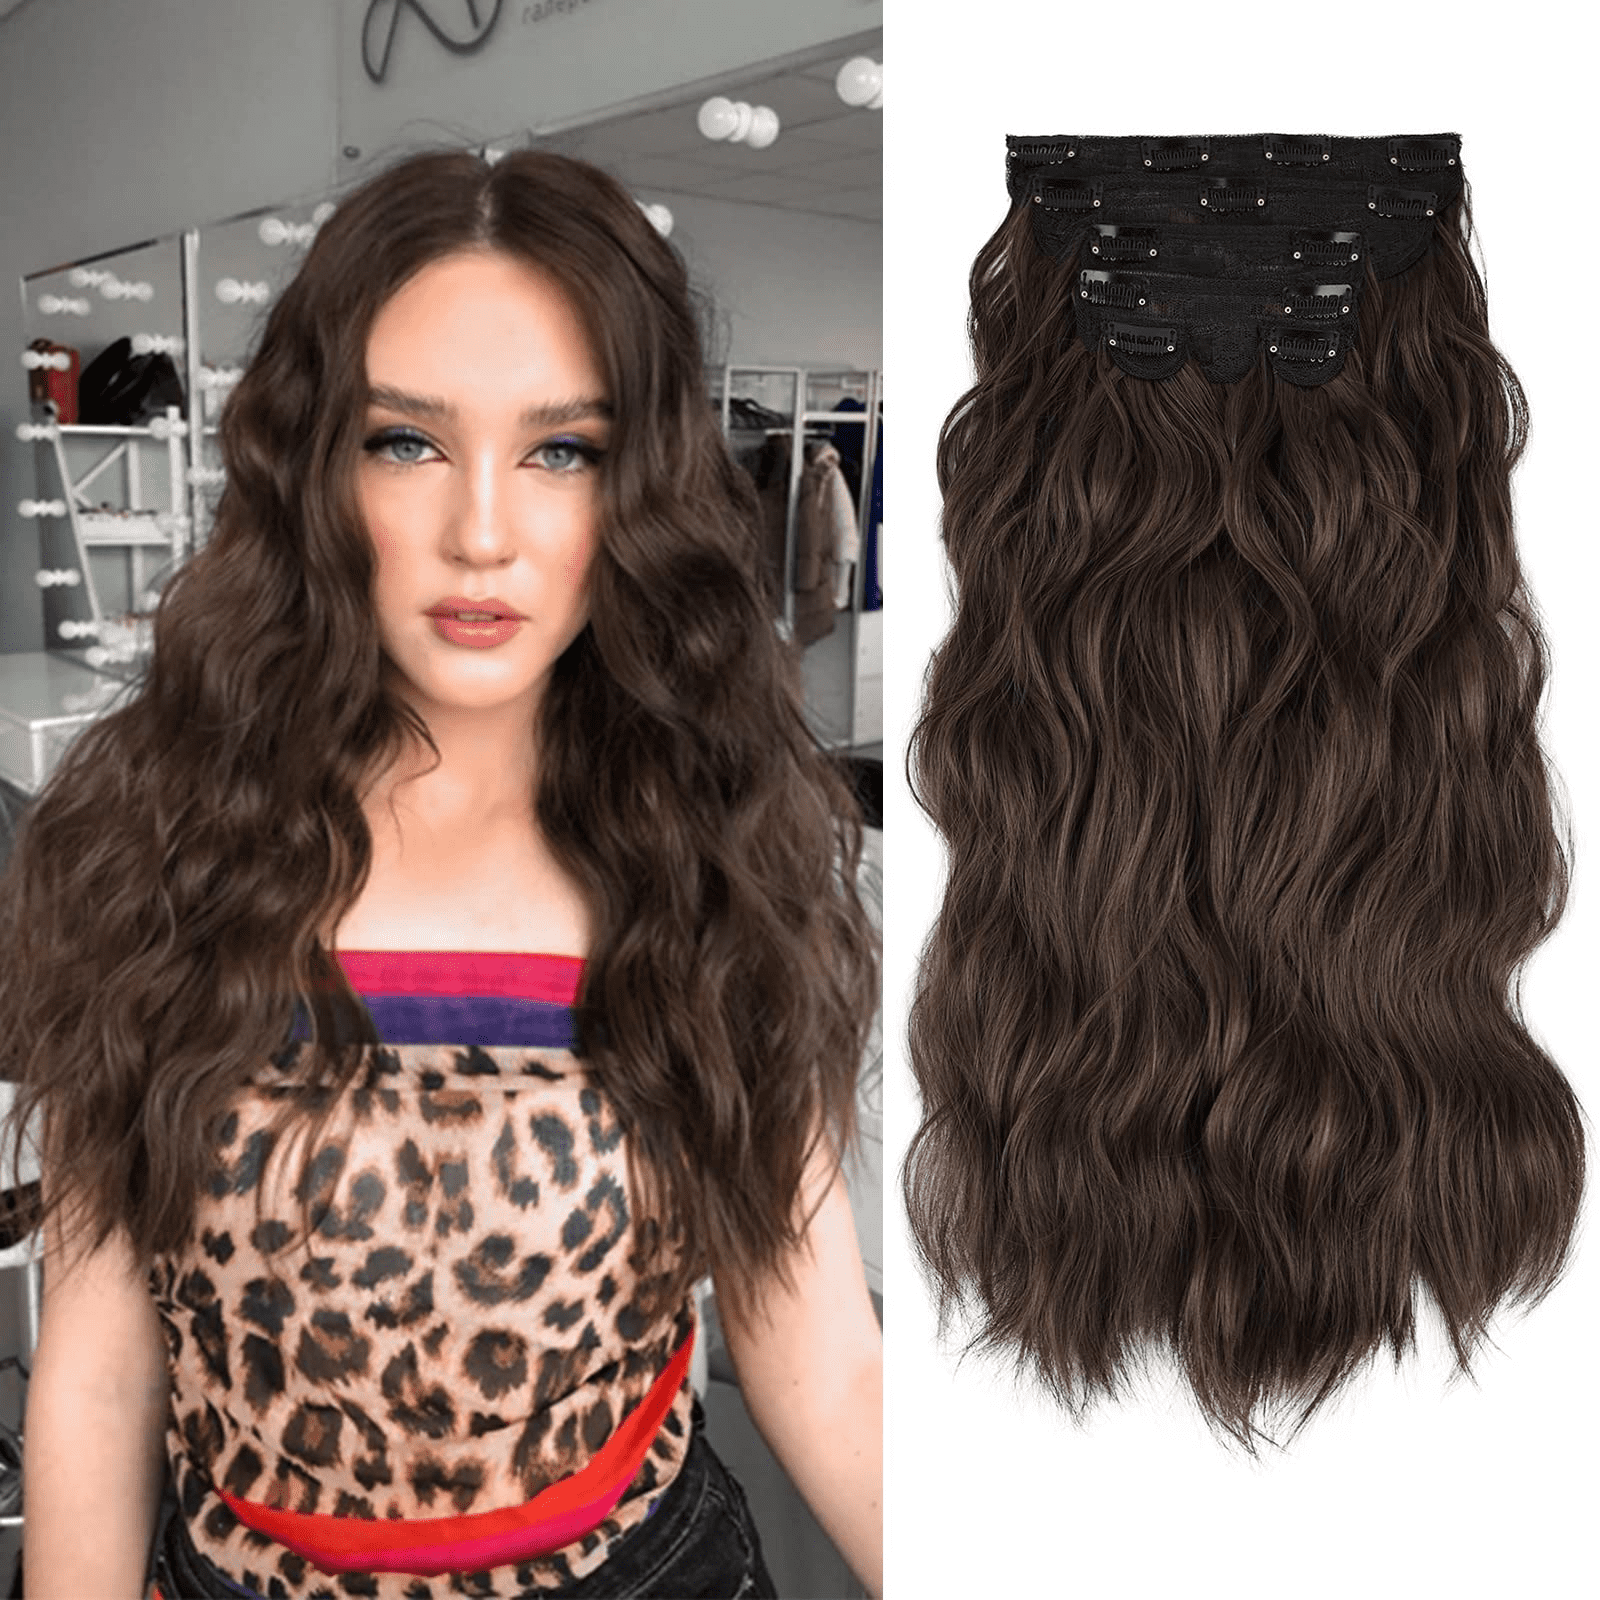 GX Beauty Clip in Hair Extensions Long Wavy 7 Pcs Invisible Clip Thick Hairpieces Black Hair Piece Soft Full Head Synthetic Fiber for Women, 22 Inches